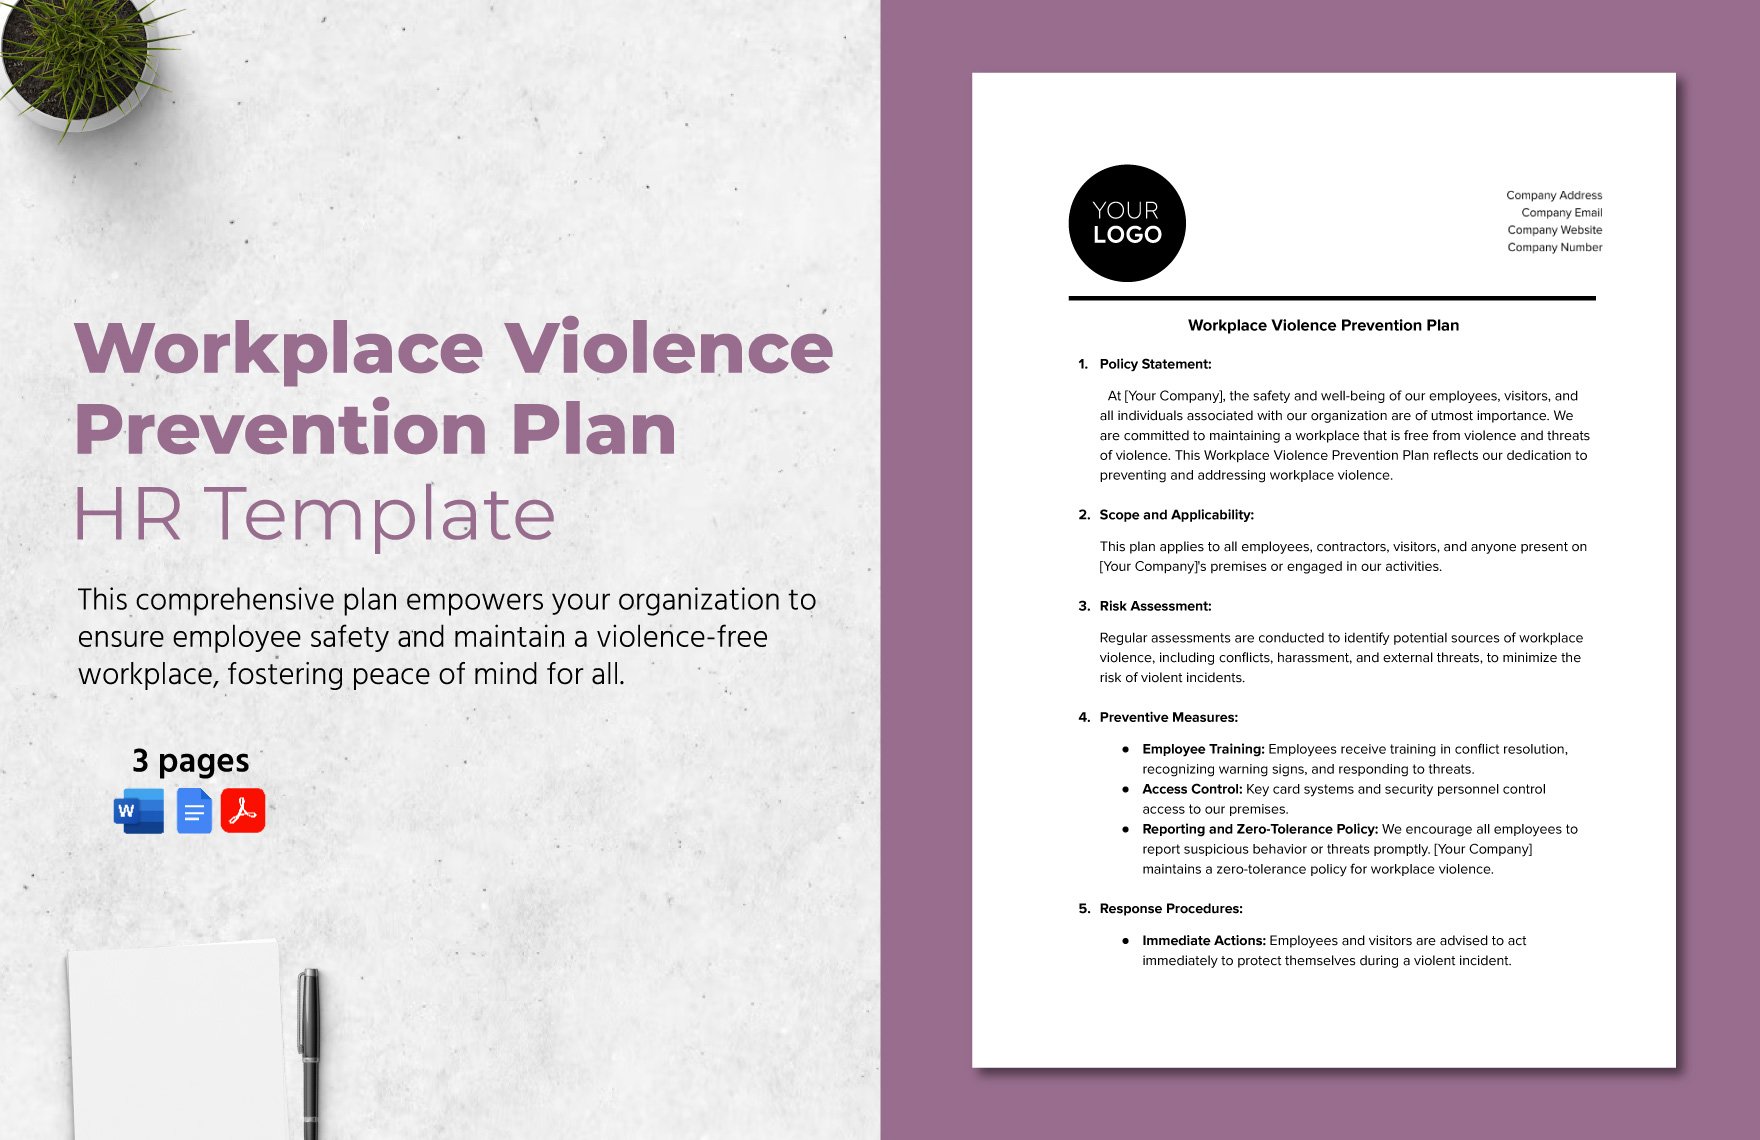 Workplace Violence Prevention Plan HR Template in Word PDF Google